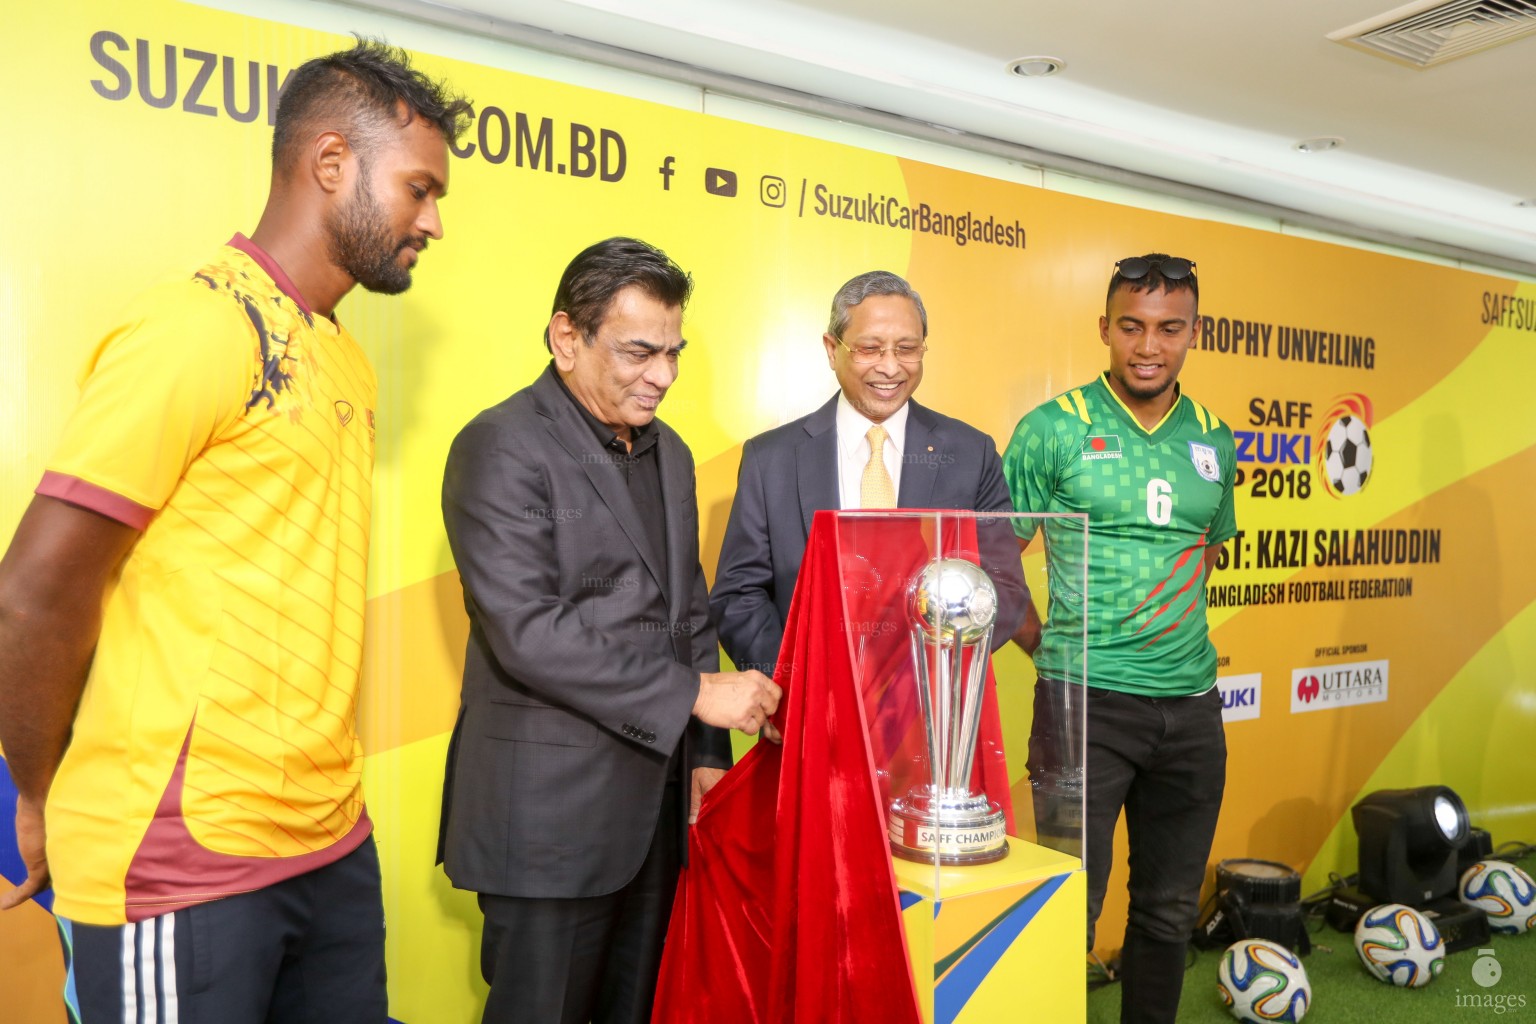 SAFF Suzuki Cup Trophy unveiling ceremony hosted by Bangladesh Football Federation in Dhaka, Bangladesh, Sunday, September 02, 2018. (Images.mv Photo/ Hussain Sinan). 